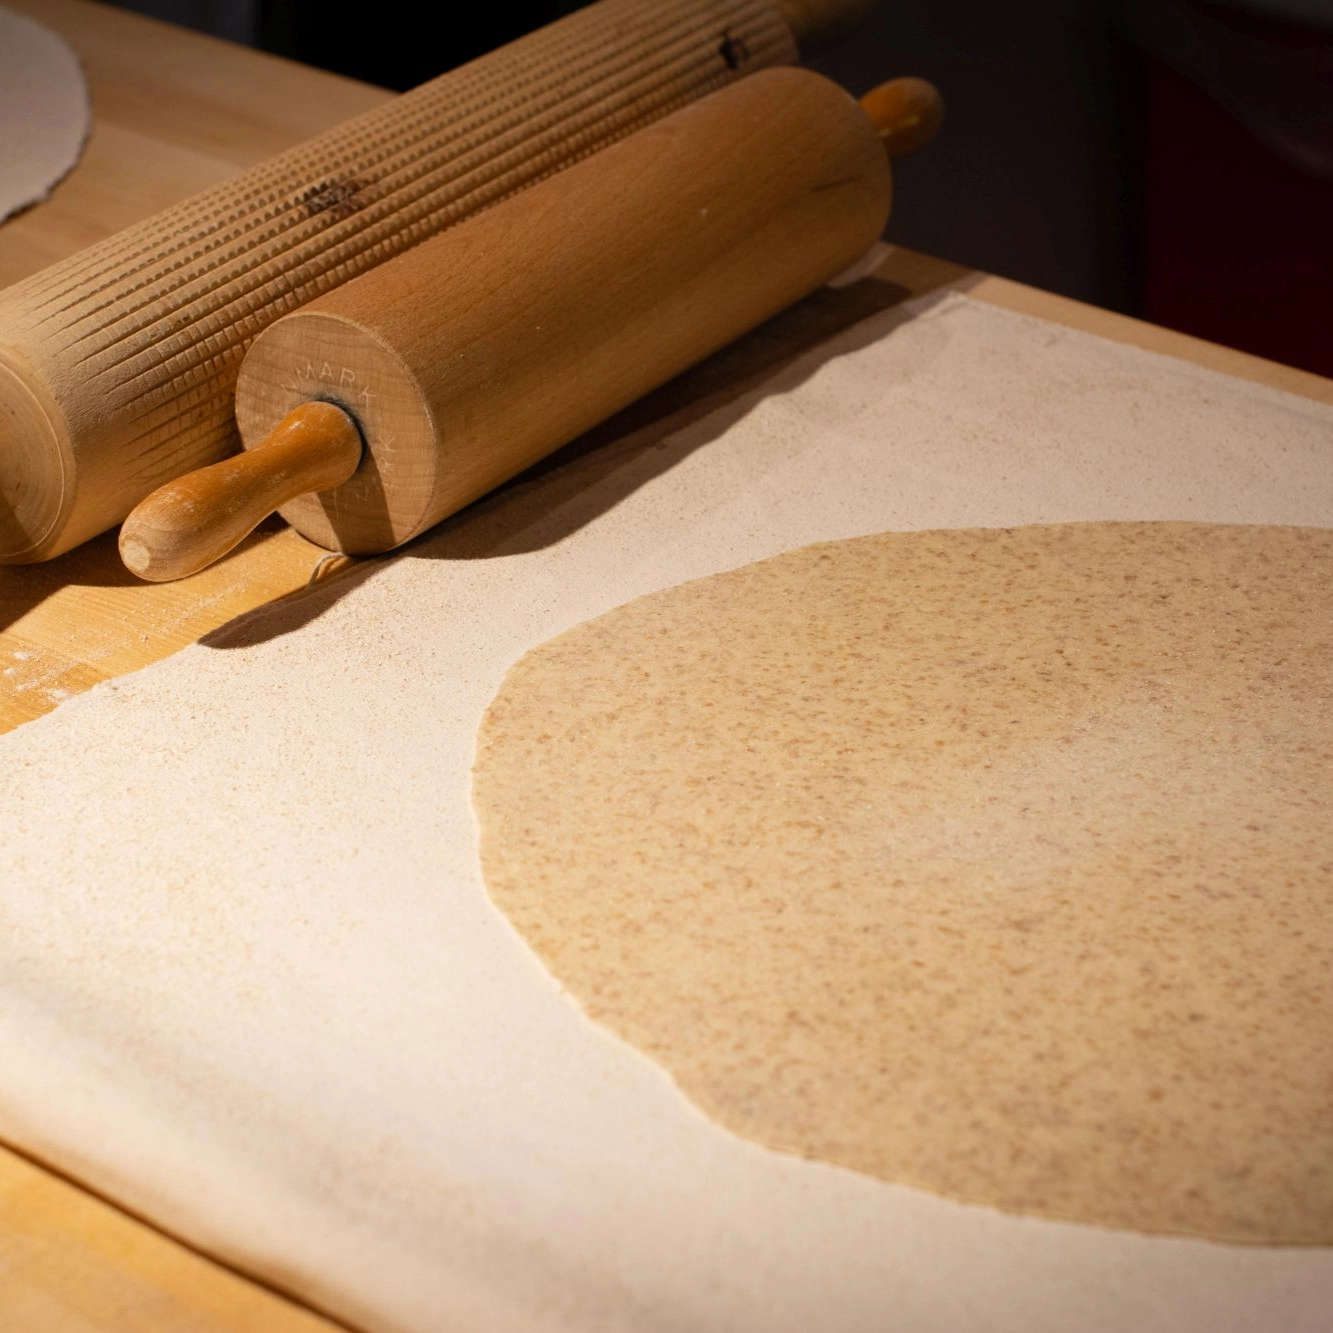 Lefse on the table - Norway